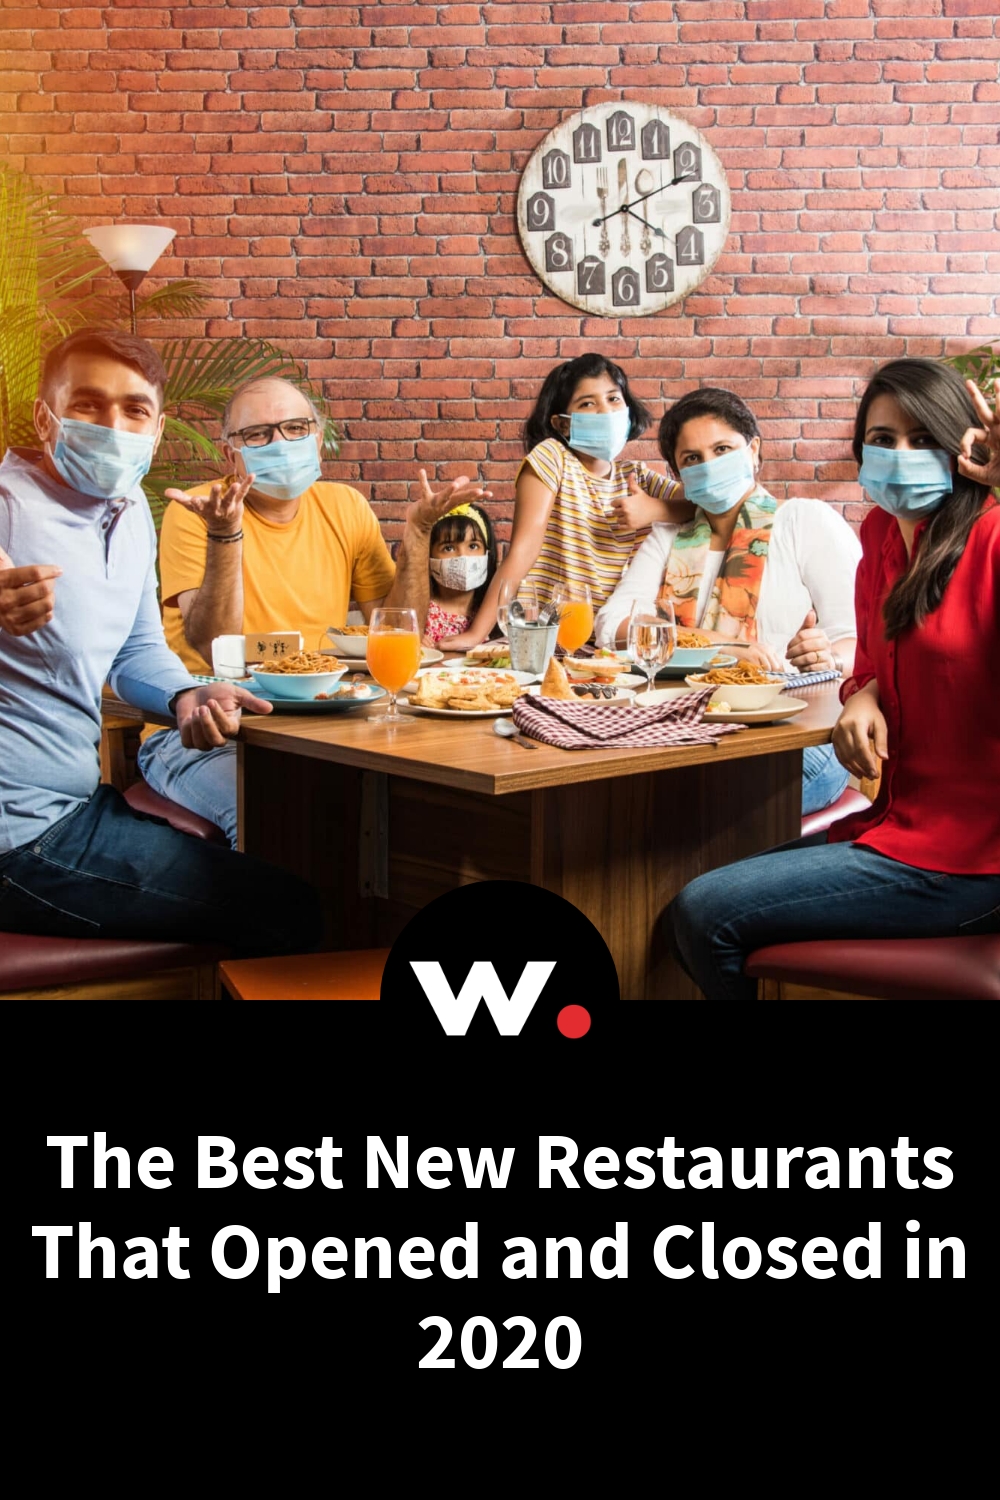 The Best New Restaurants That Opened and Closed in 2020